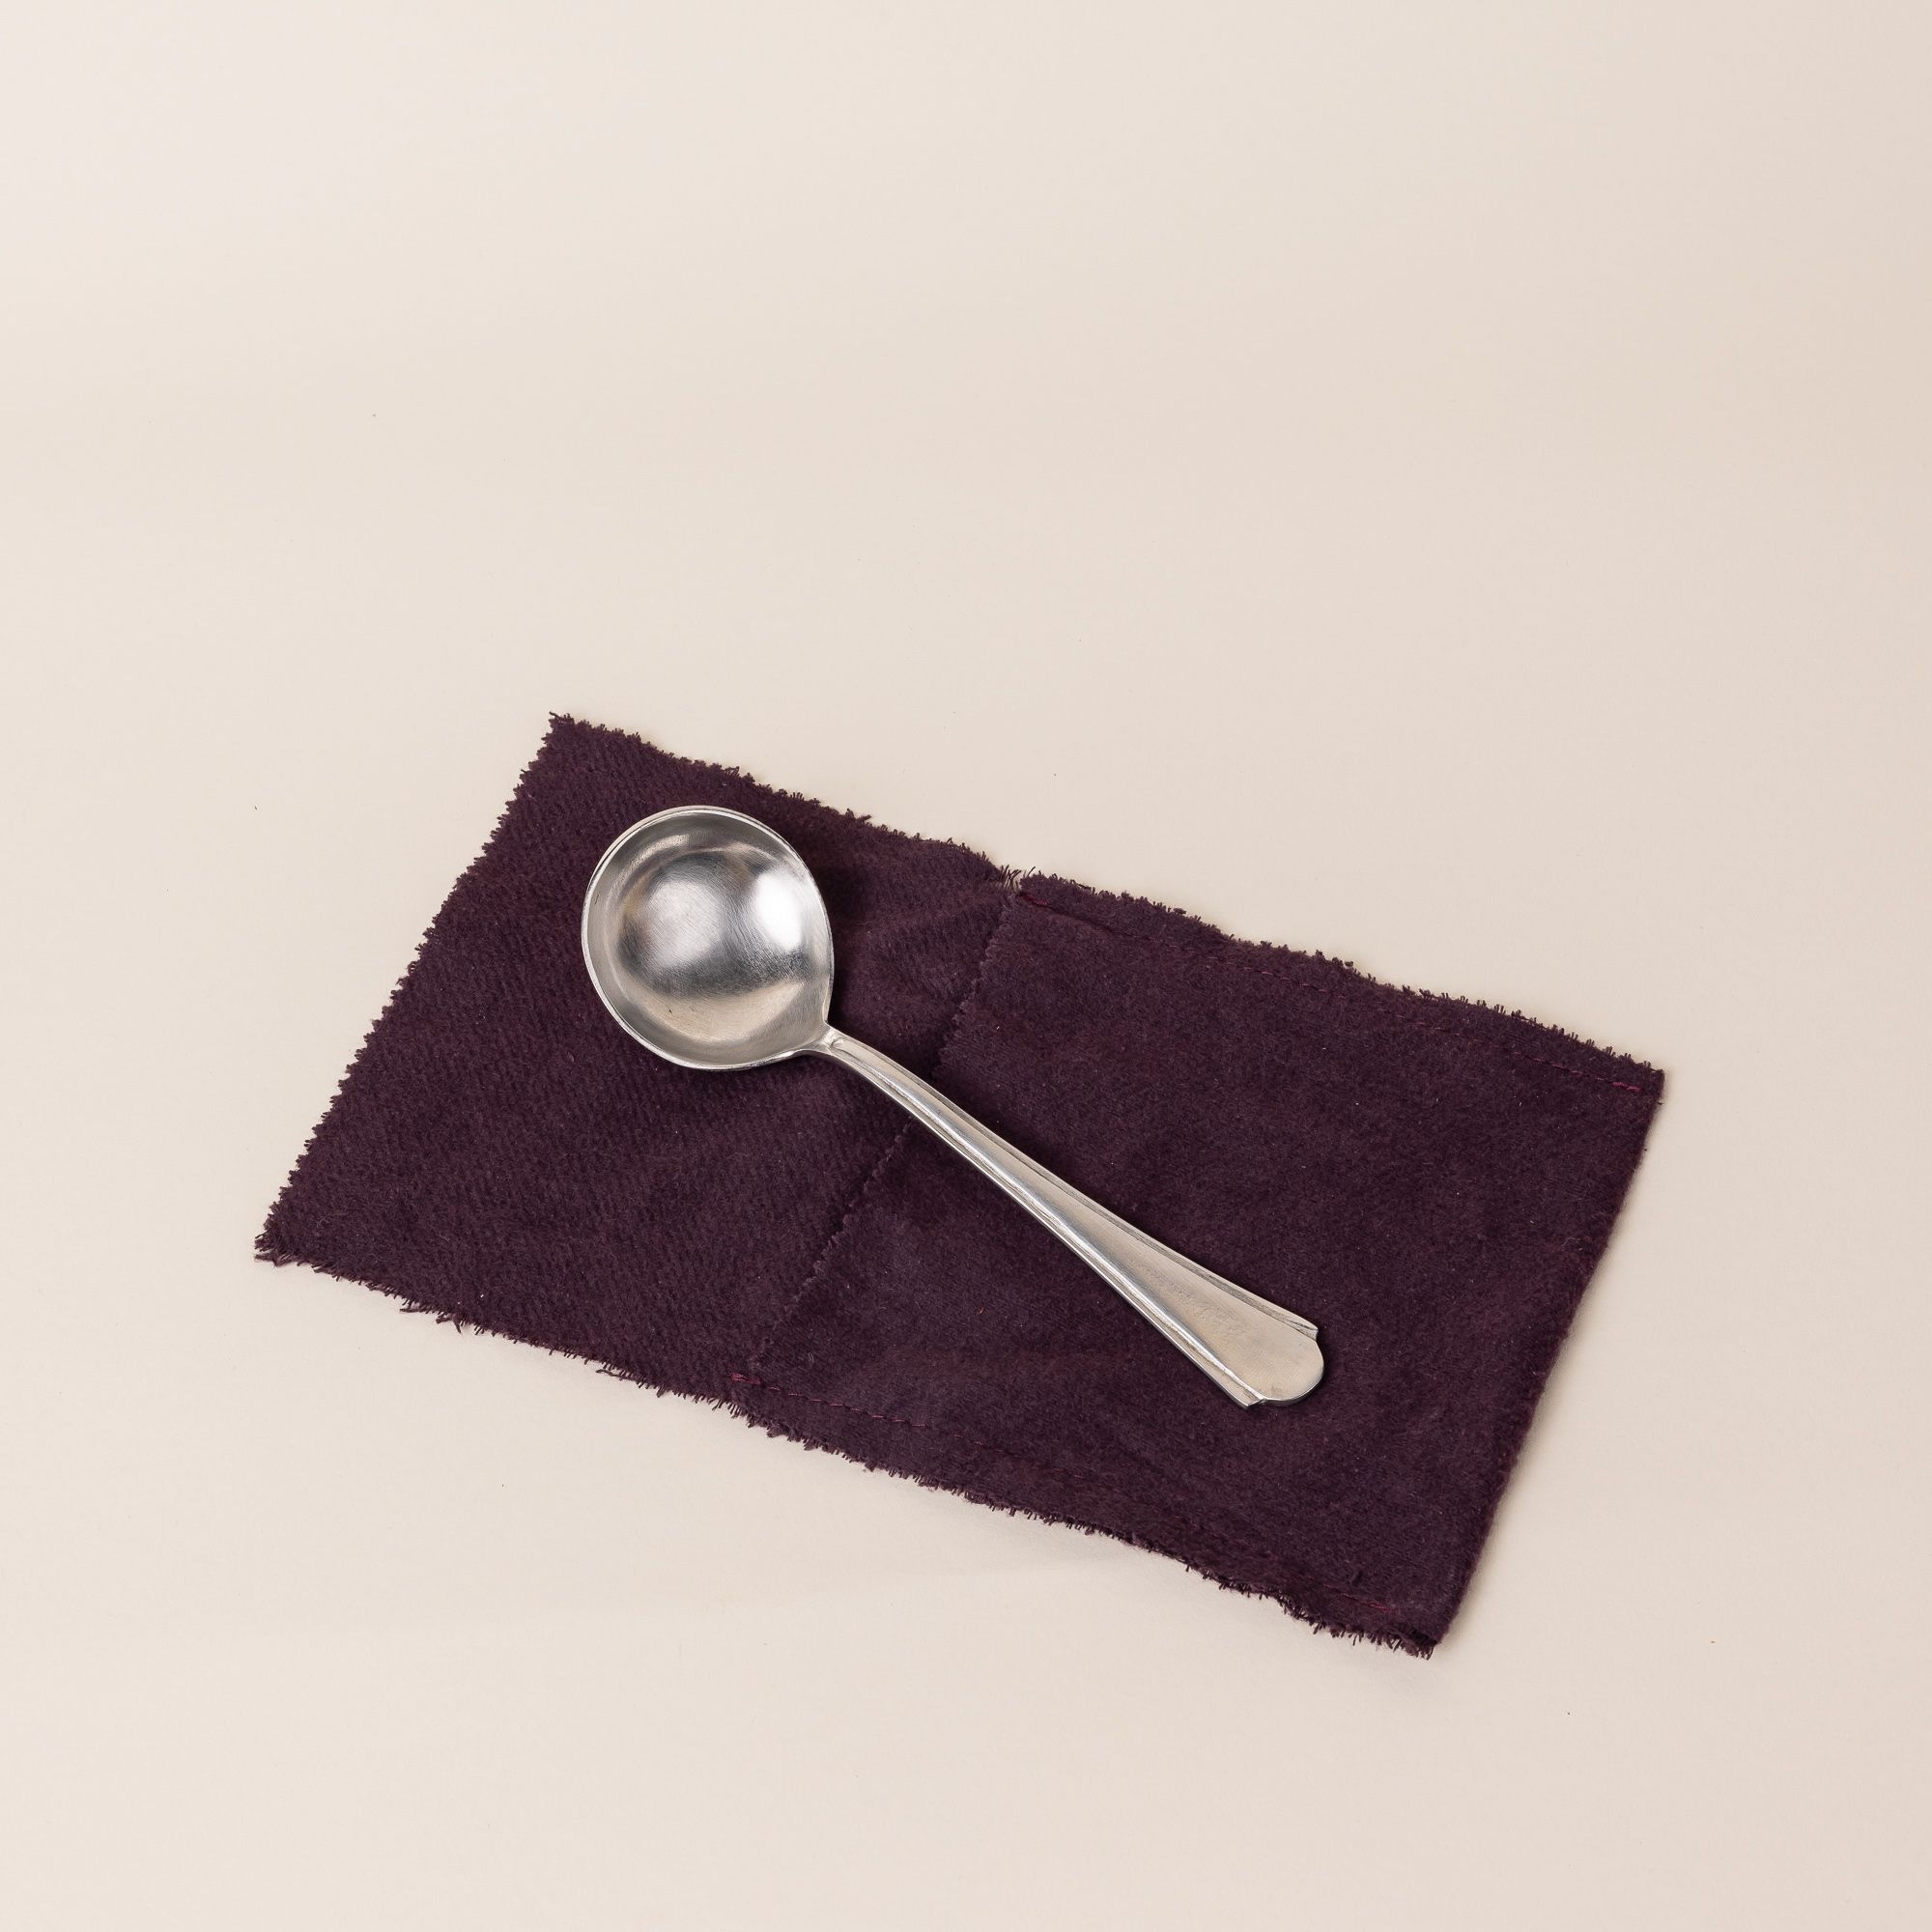 A silver spoon sits on a dark purple rectangle of fabric. The spoon has a skinny handle that gets a little wider and round on the end. The bowl of a spoon is circular.